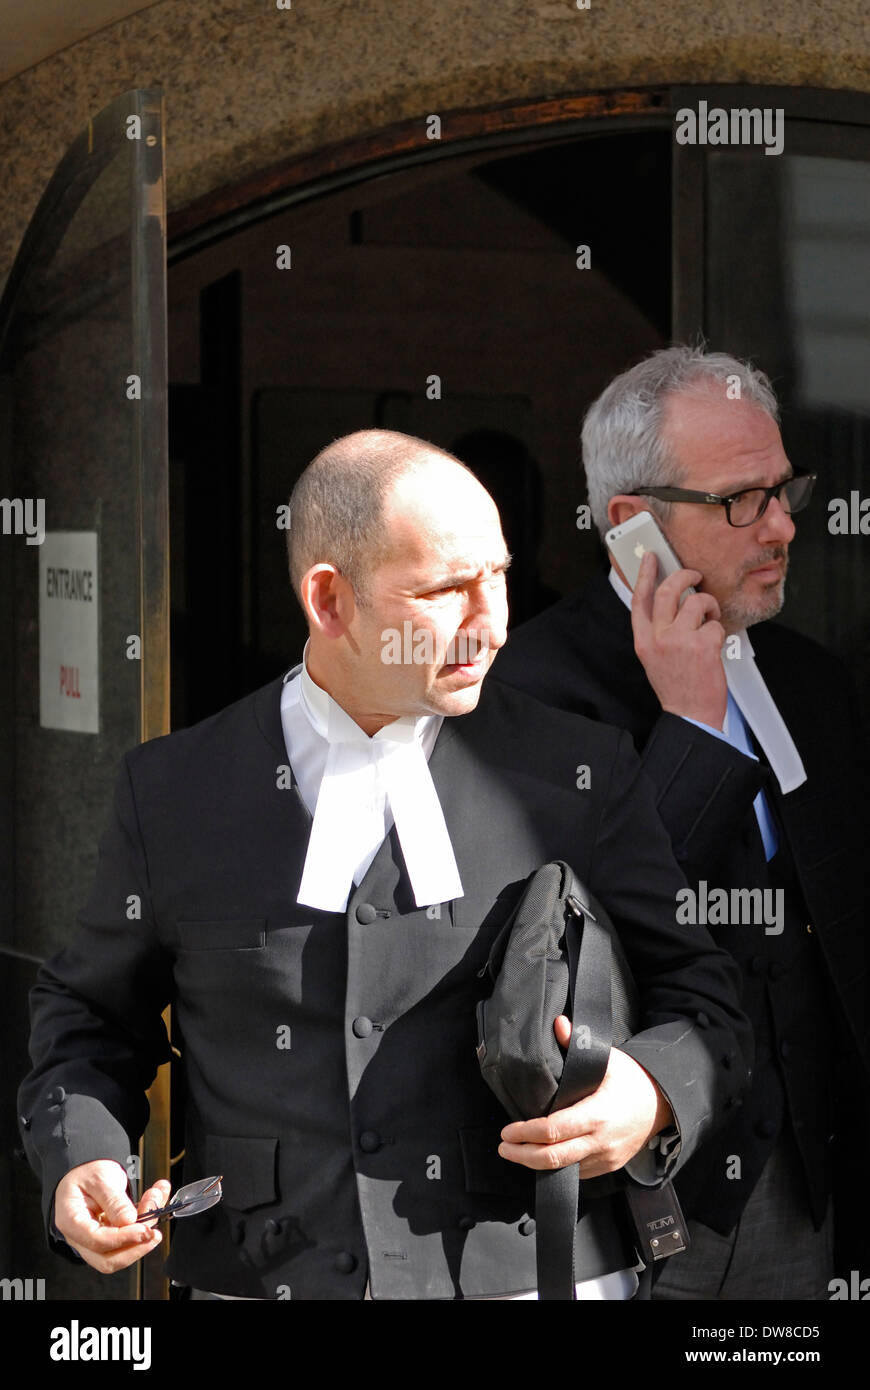 London, England, UK. Off-duty barristers leaving the Old Bailey / Central Criminal Court. Stock Photo